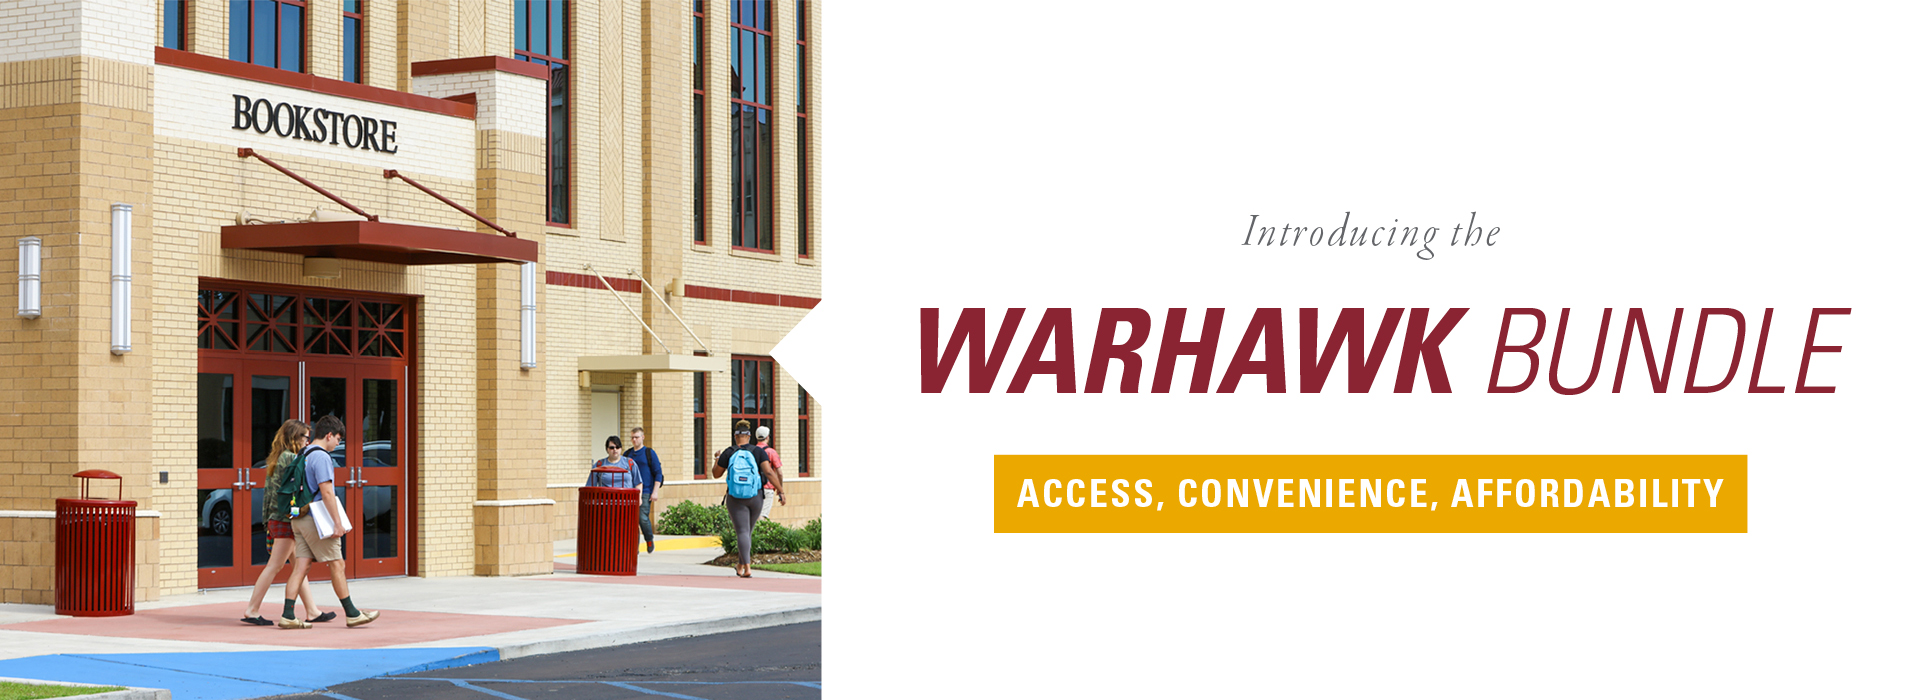 Introducing the Warhawks Bundle - Access, Convenience, Affordability banner